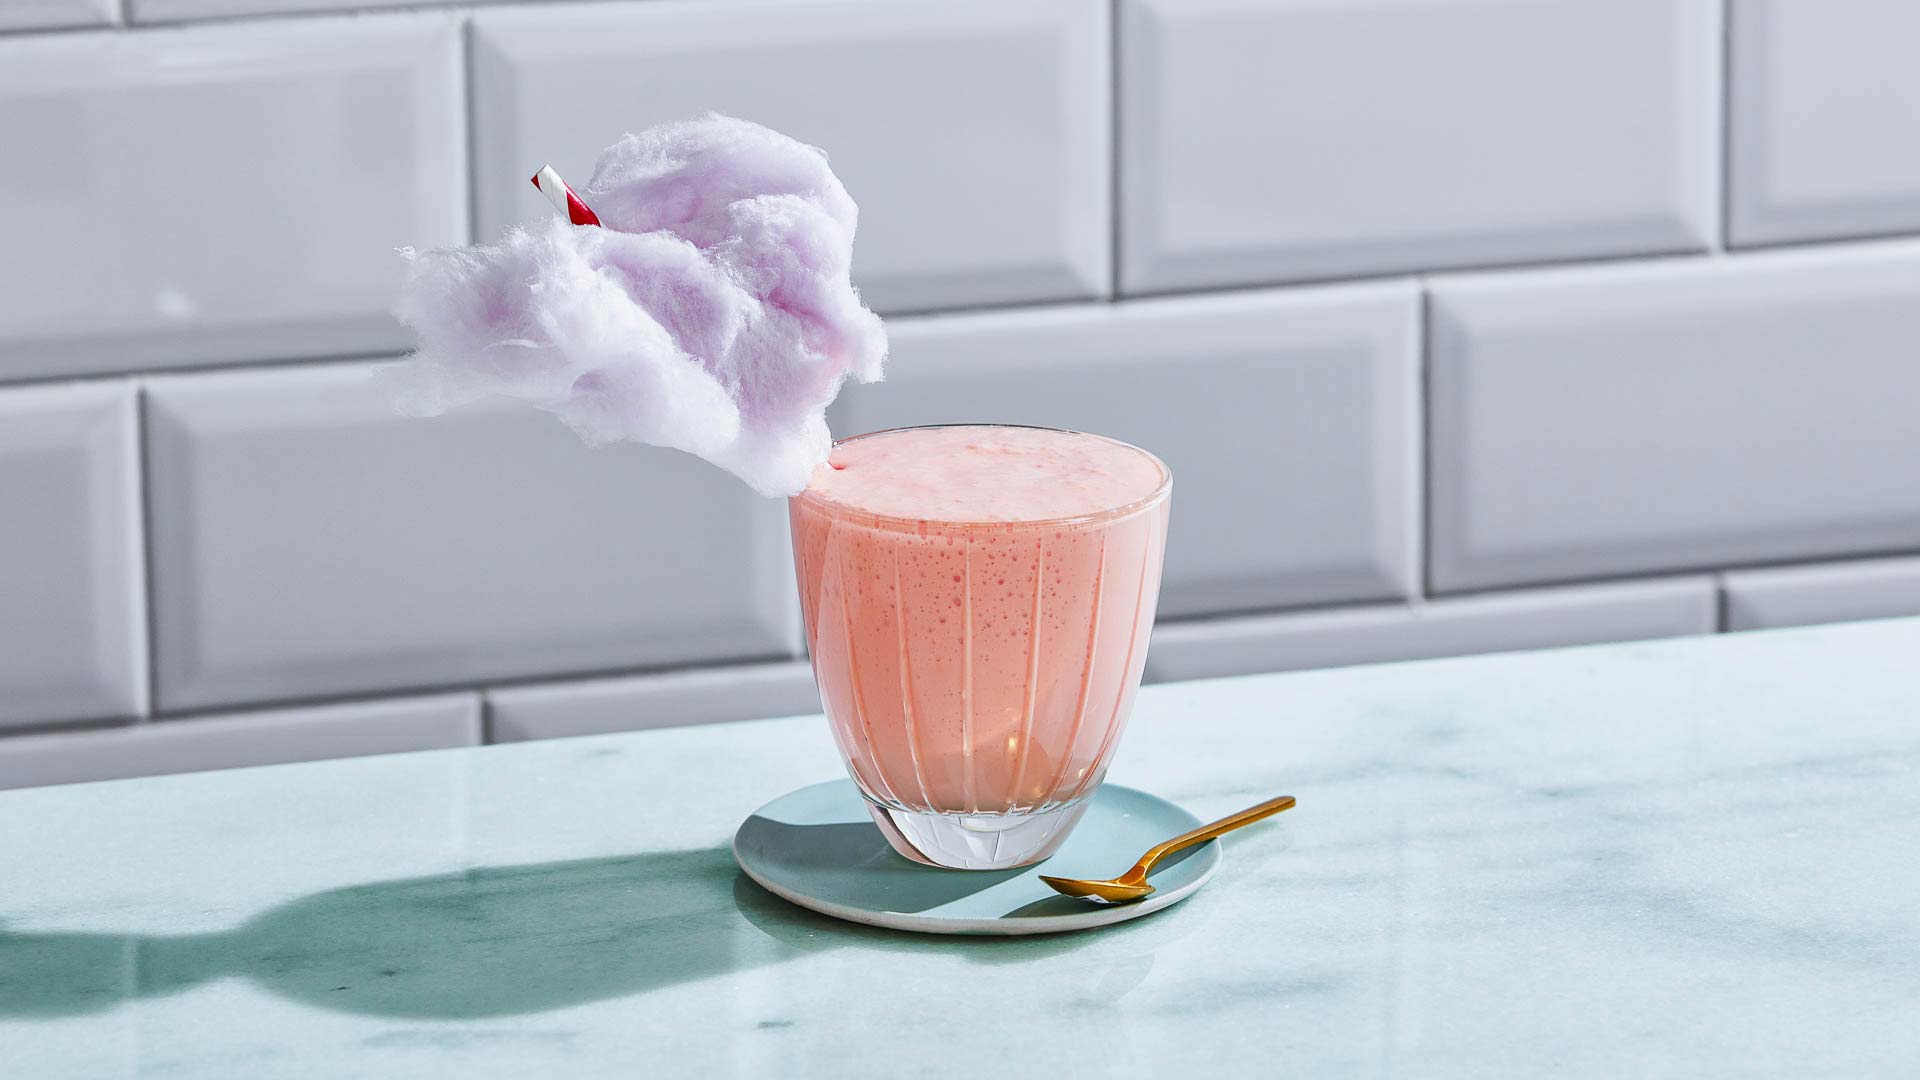 Glass of Cotton Candy Milkshake against a tiled wall